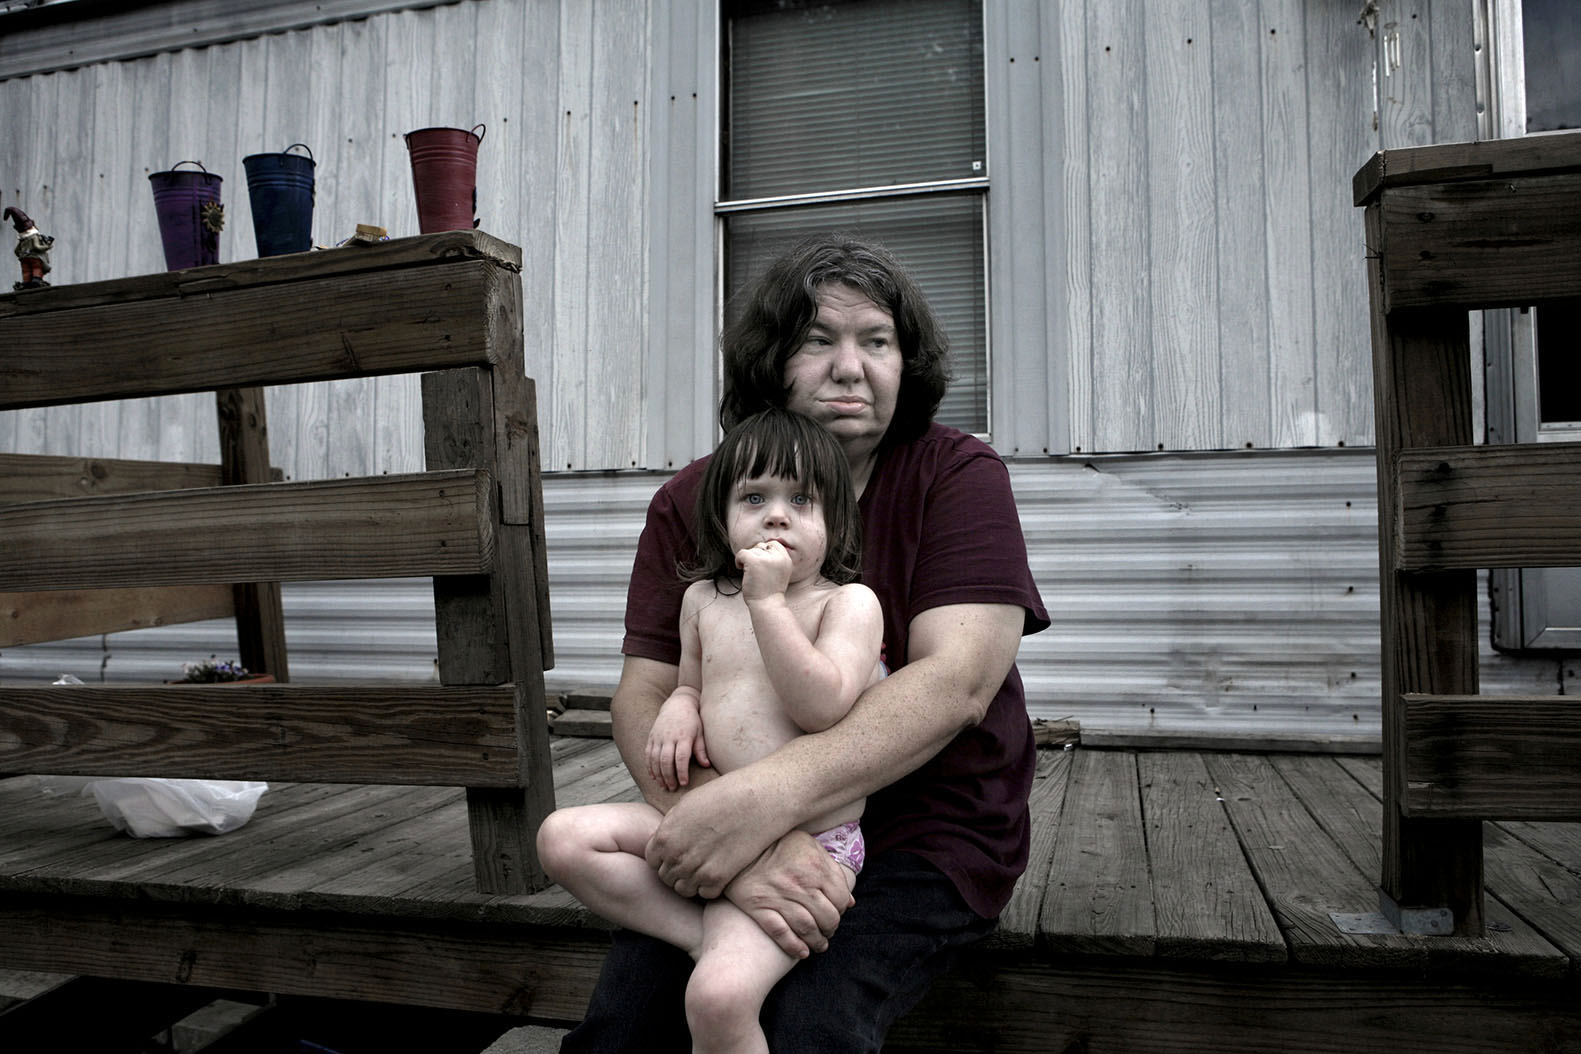 West Virginia 2008 - Appalachia is one of the poorest areas in the U.S.